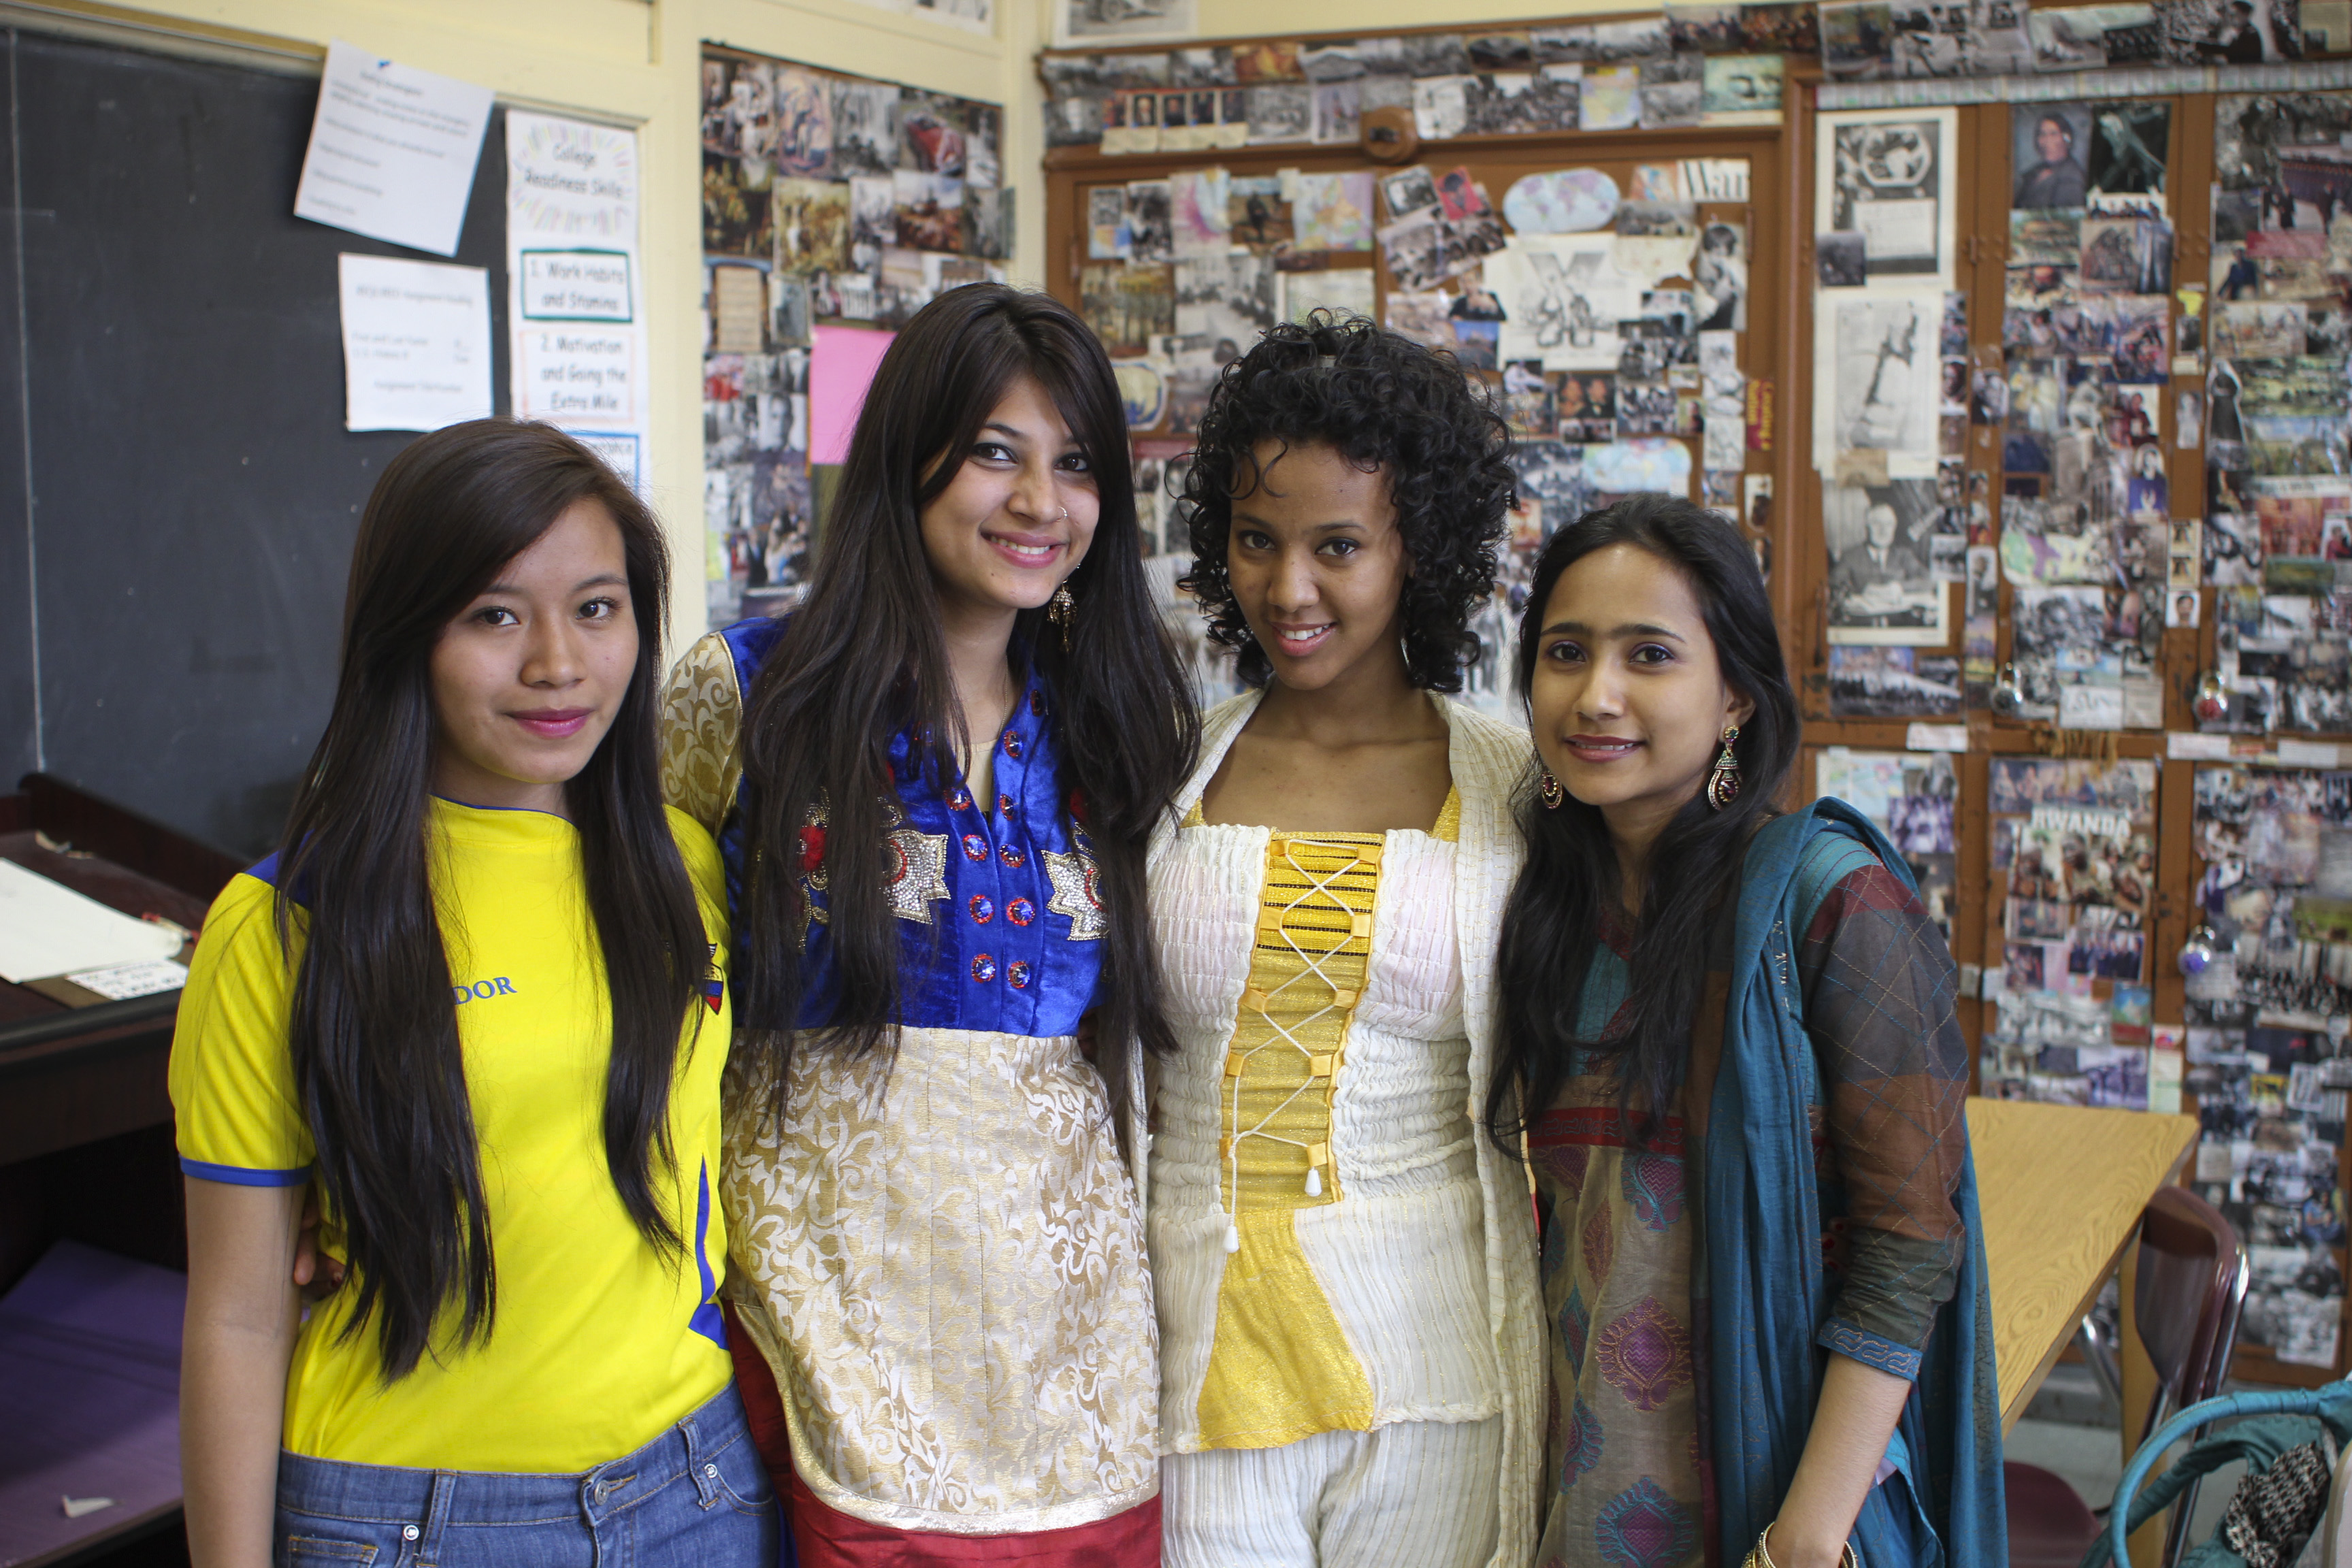 Students in traditional dress for Culture Day